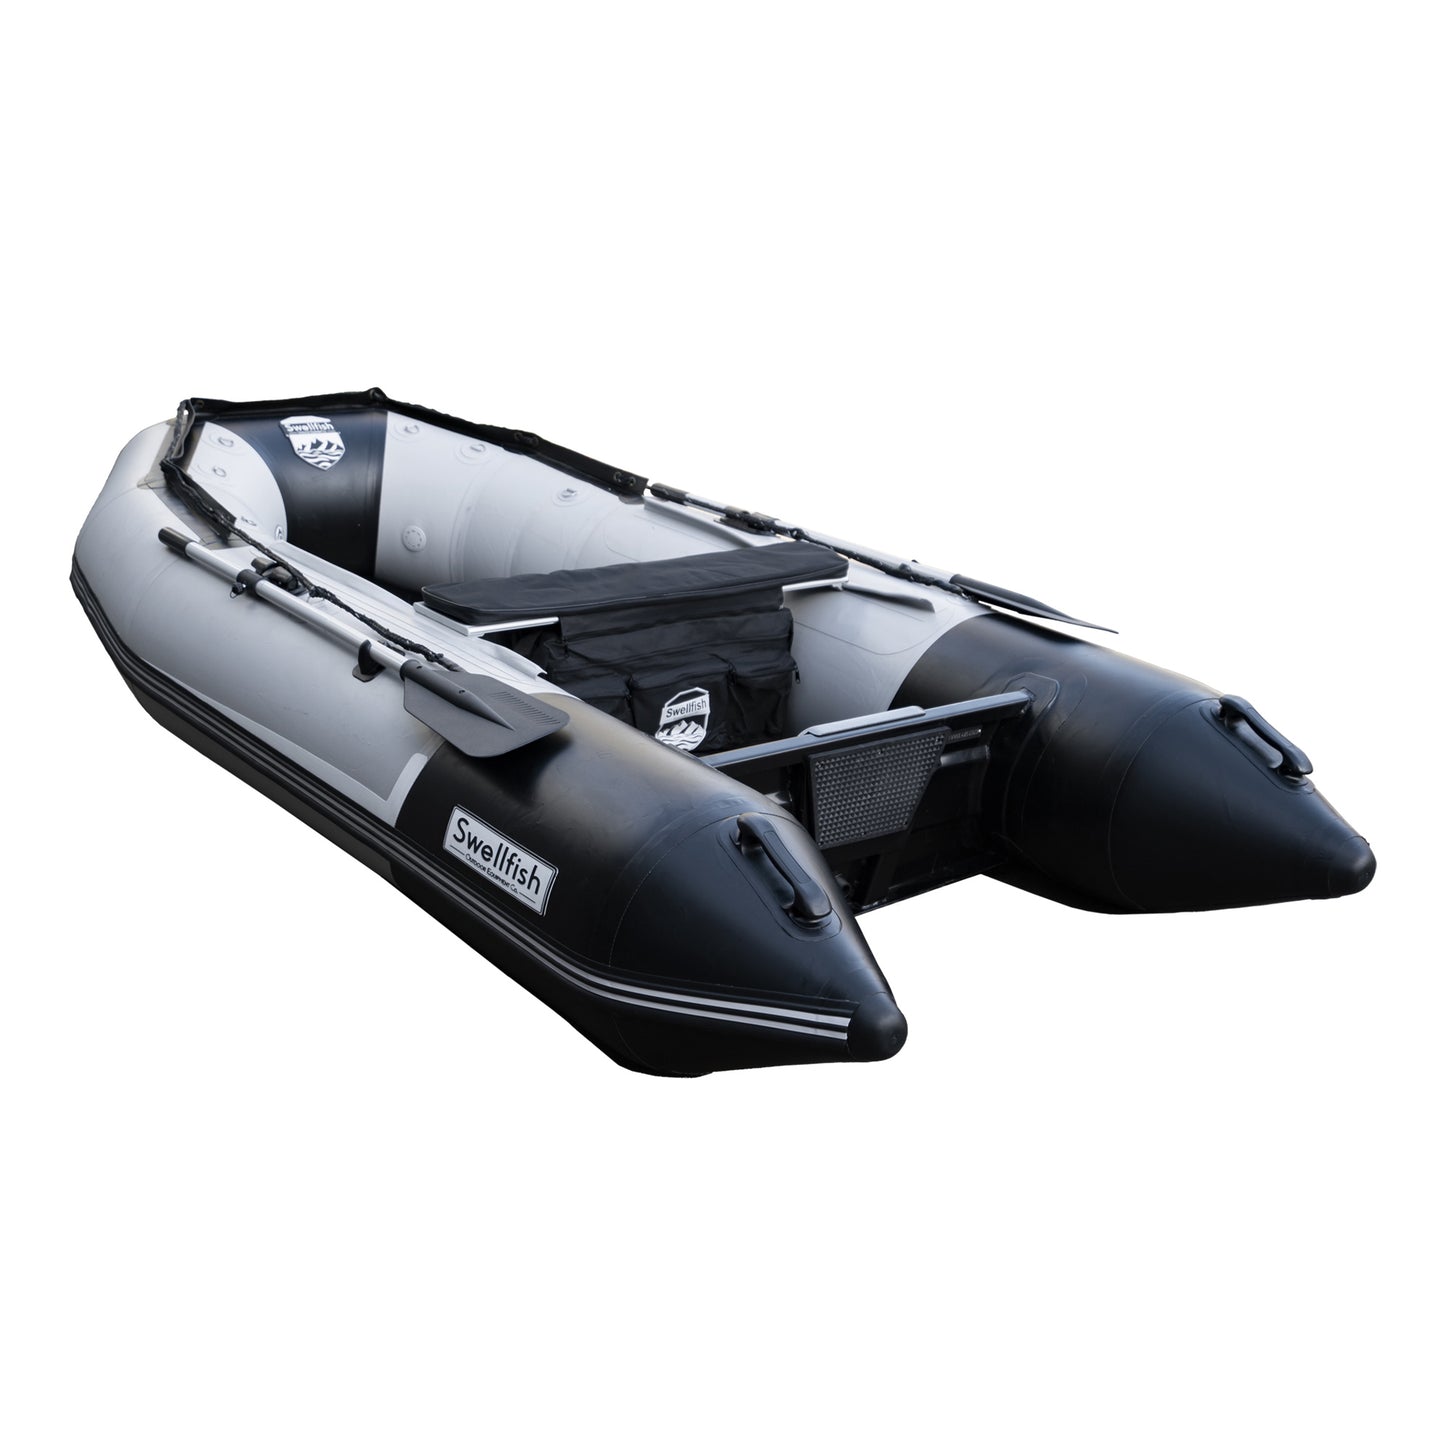 FS Ultralight Inflatable Boat